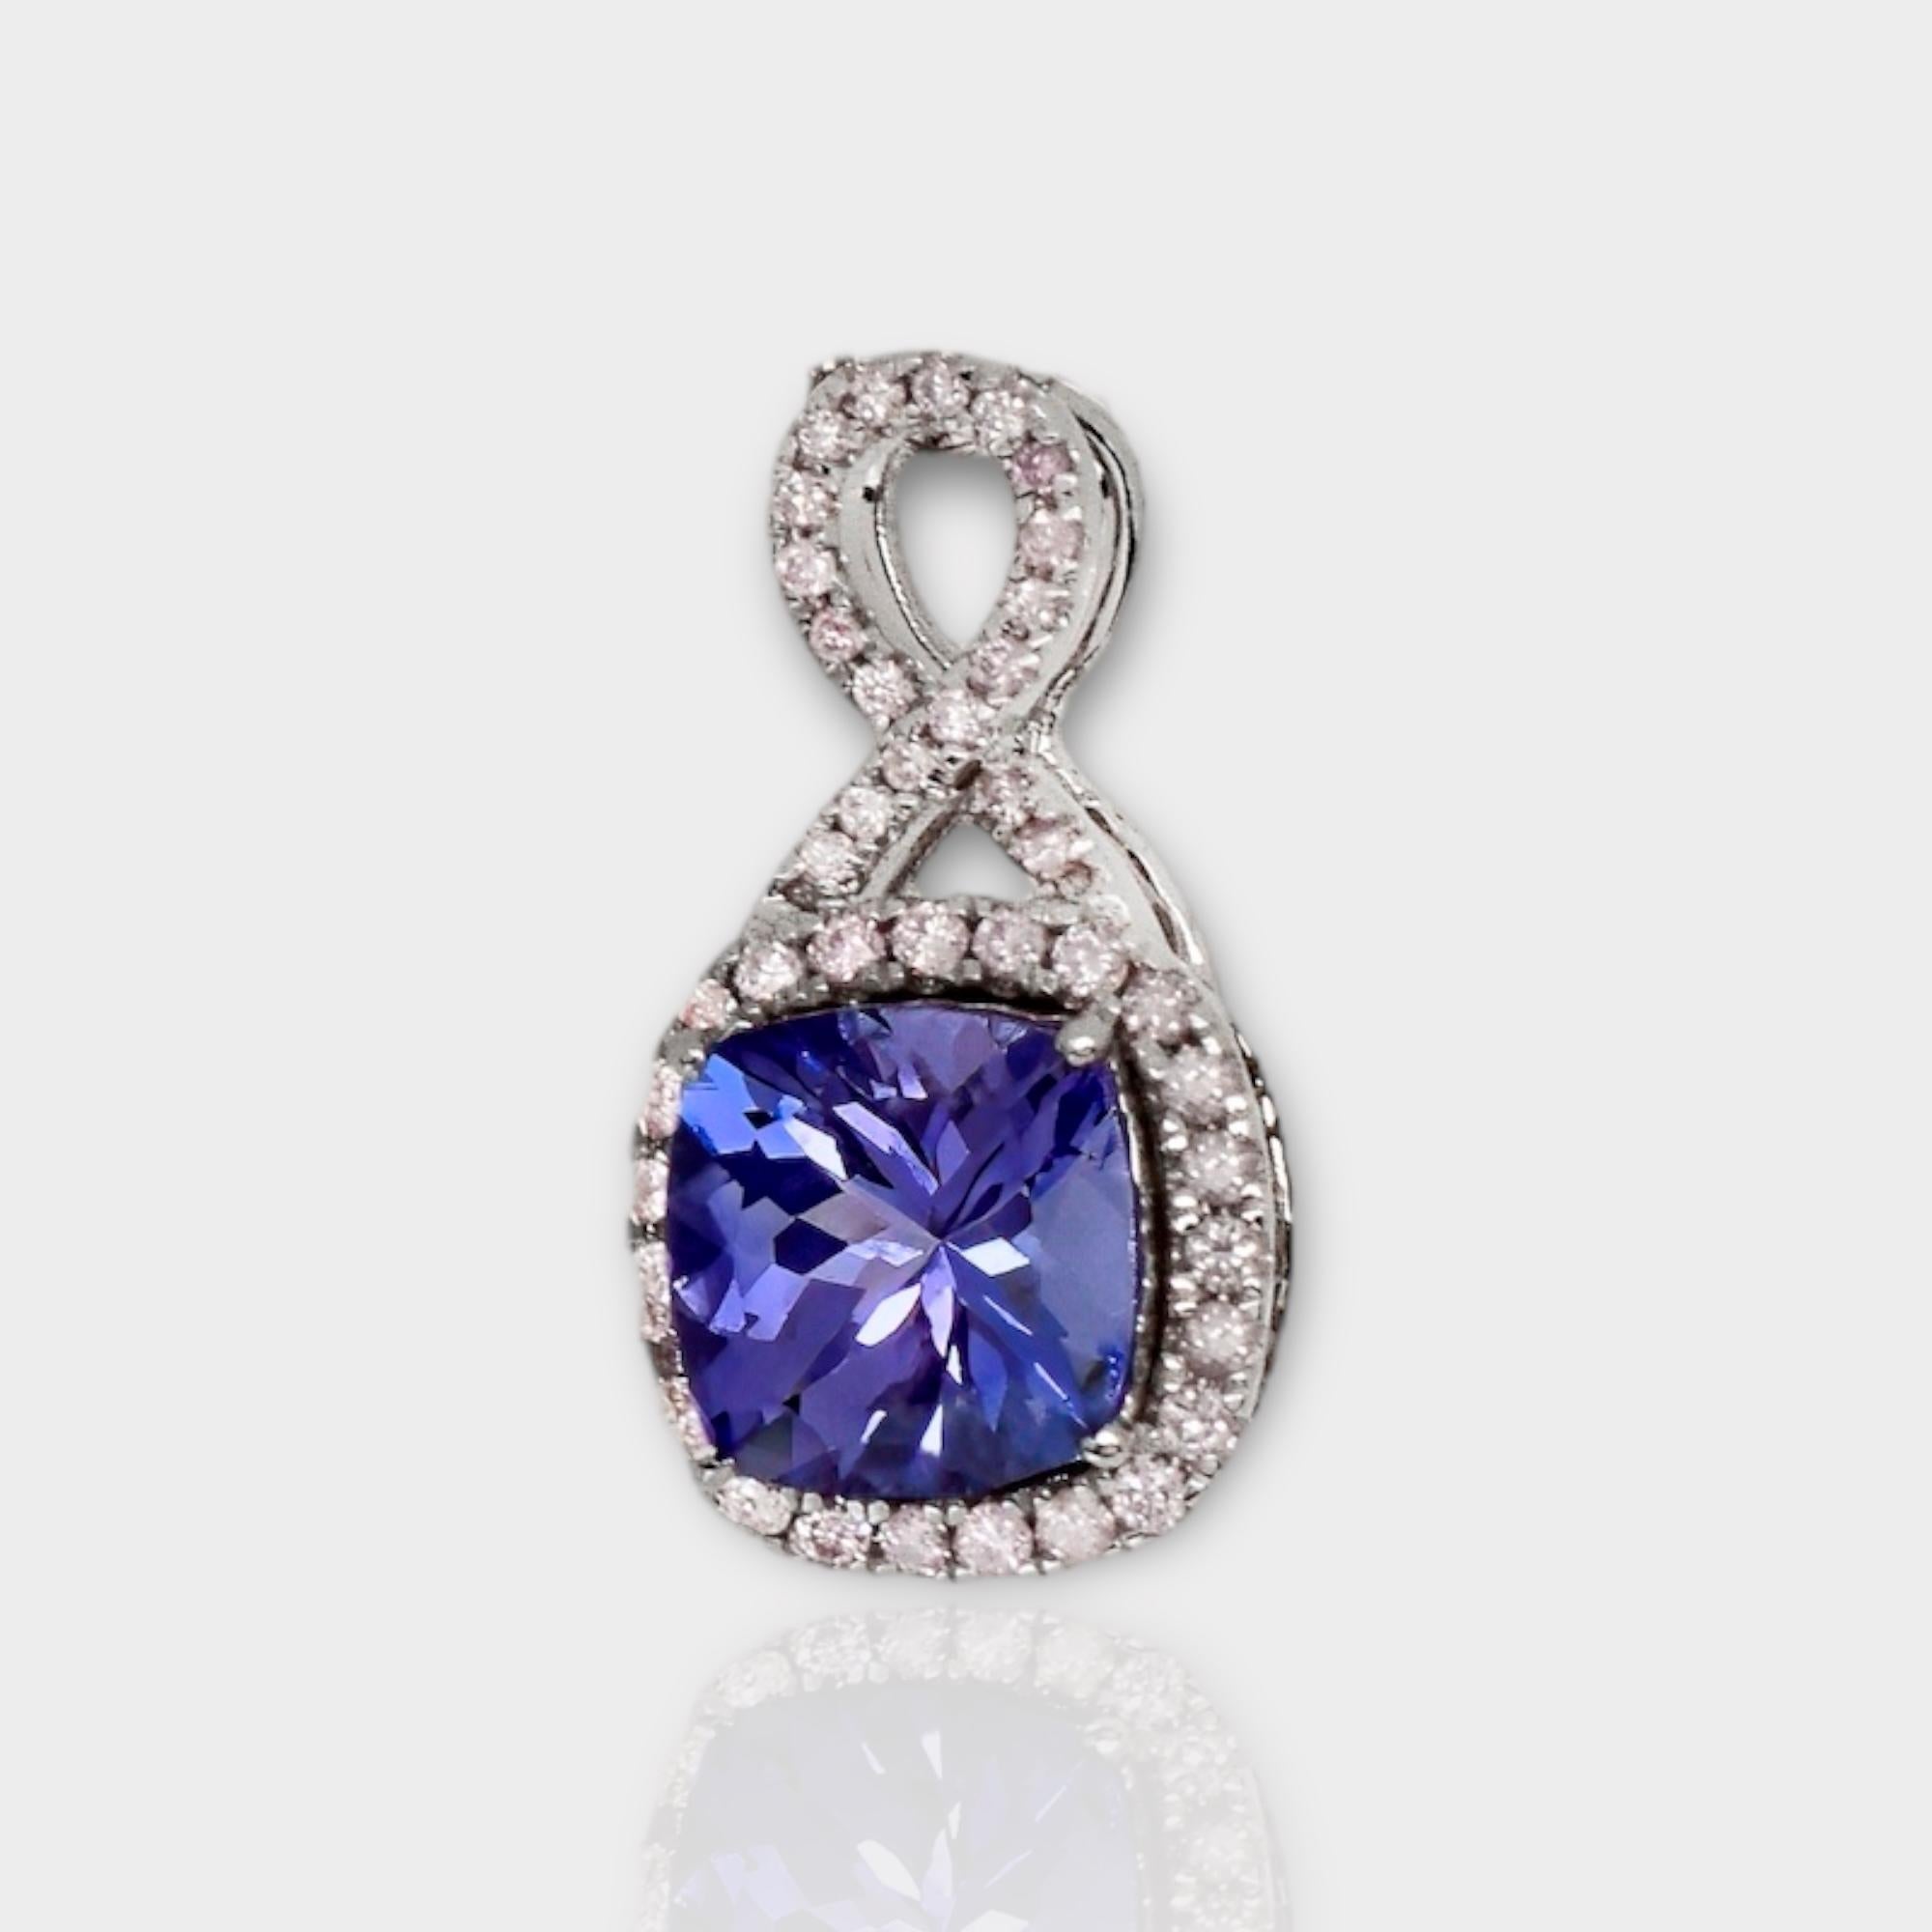 IGI 14K 2.08 ct Tanzanite&Pink Diamond Antique Pendant Necklace In New Condition For Sale In Kaohsiung City, TW